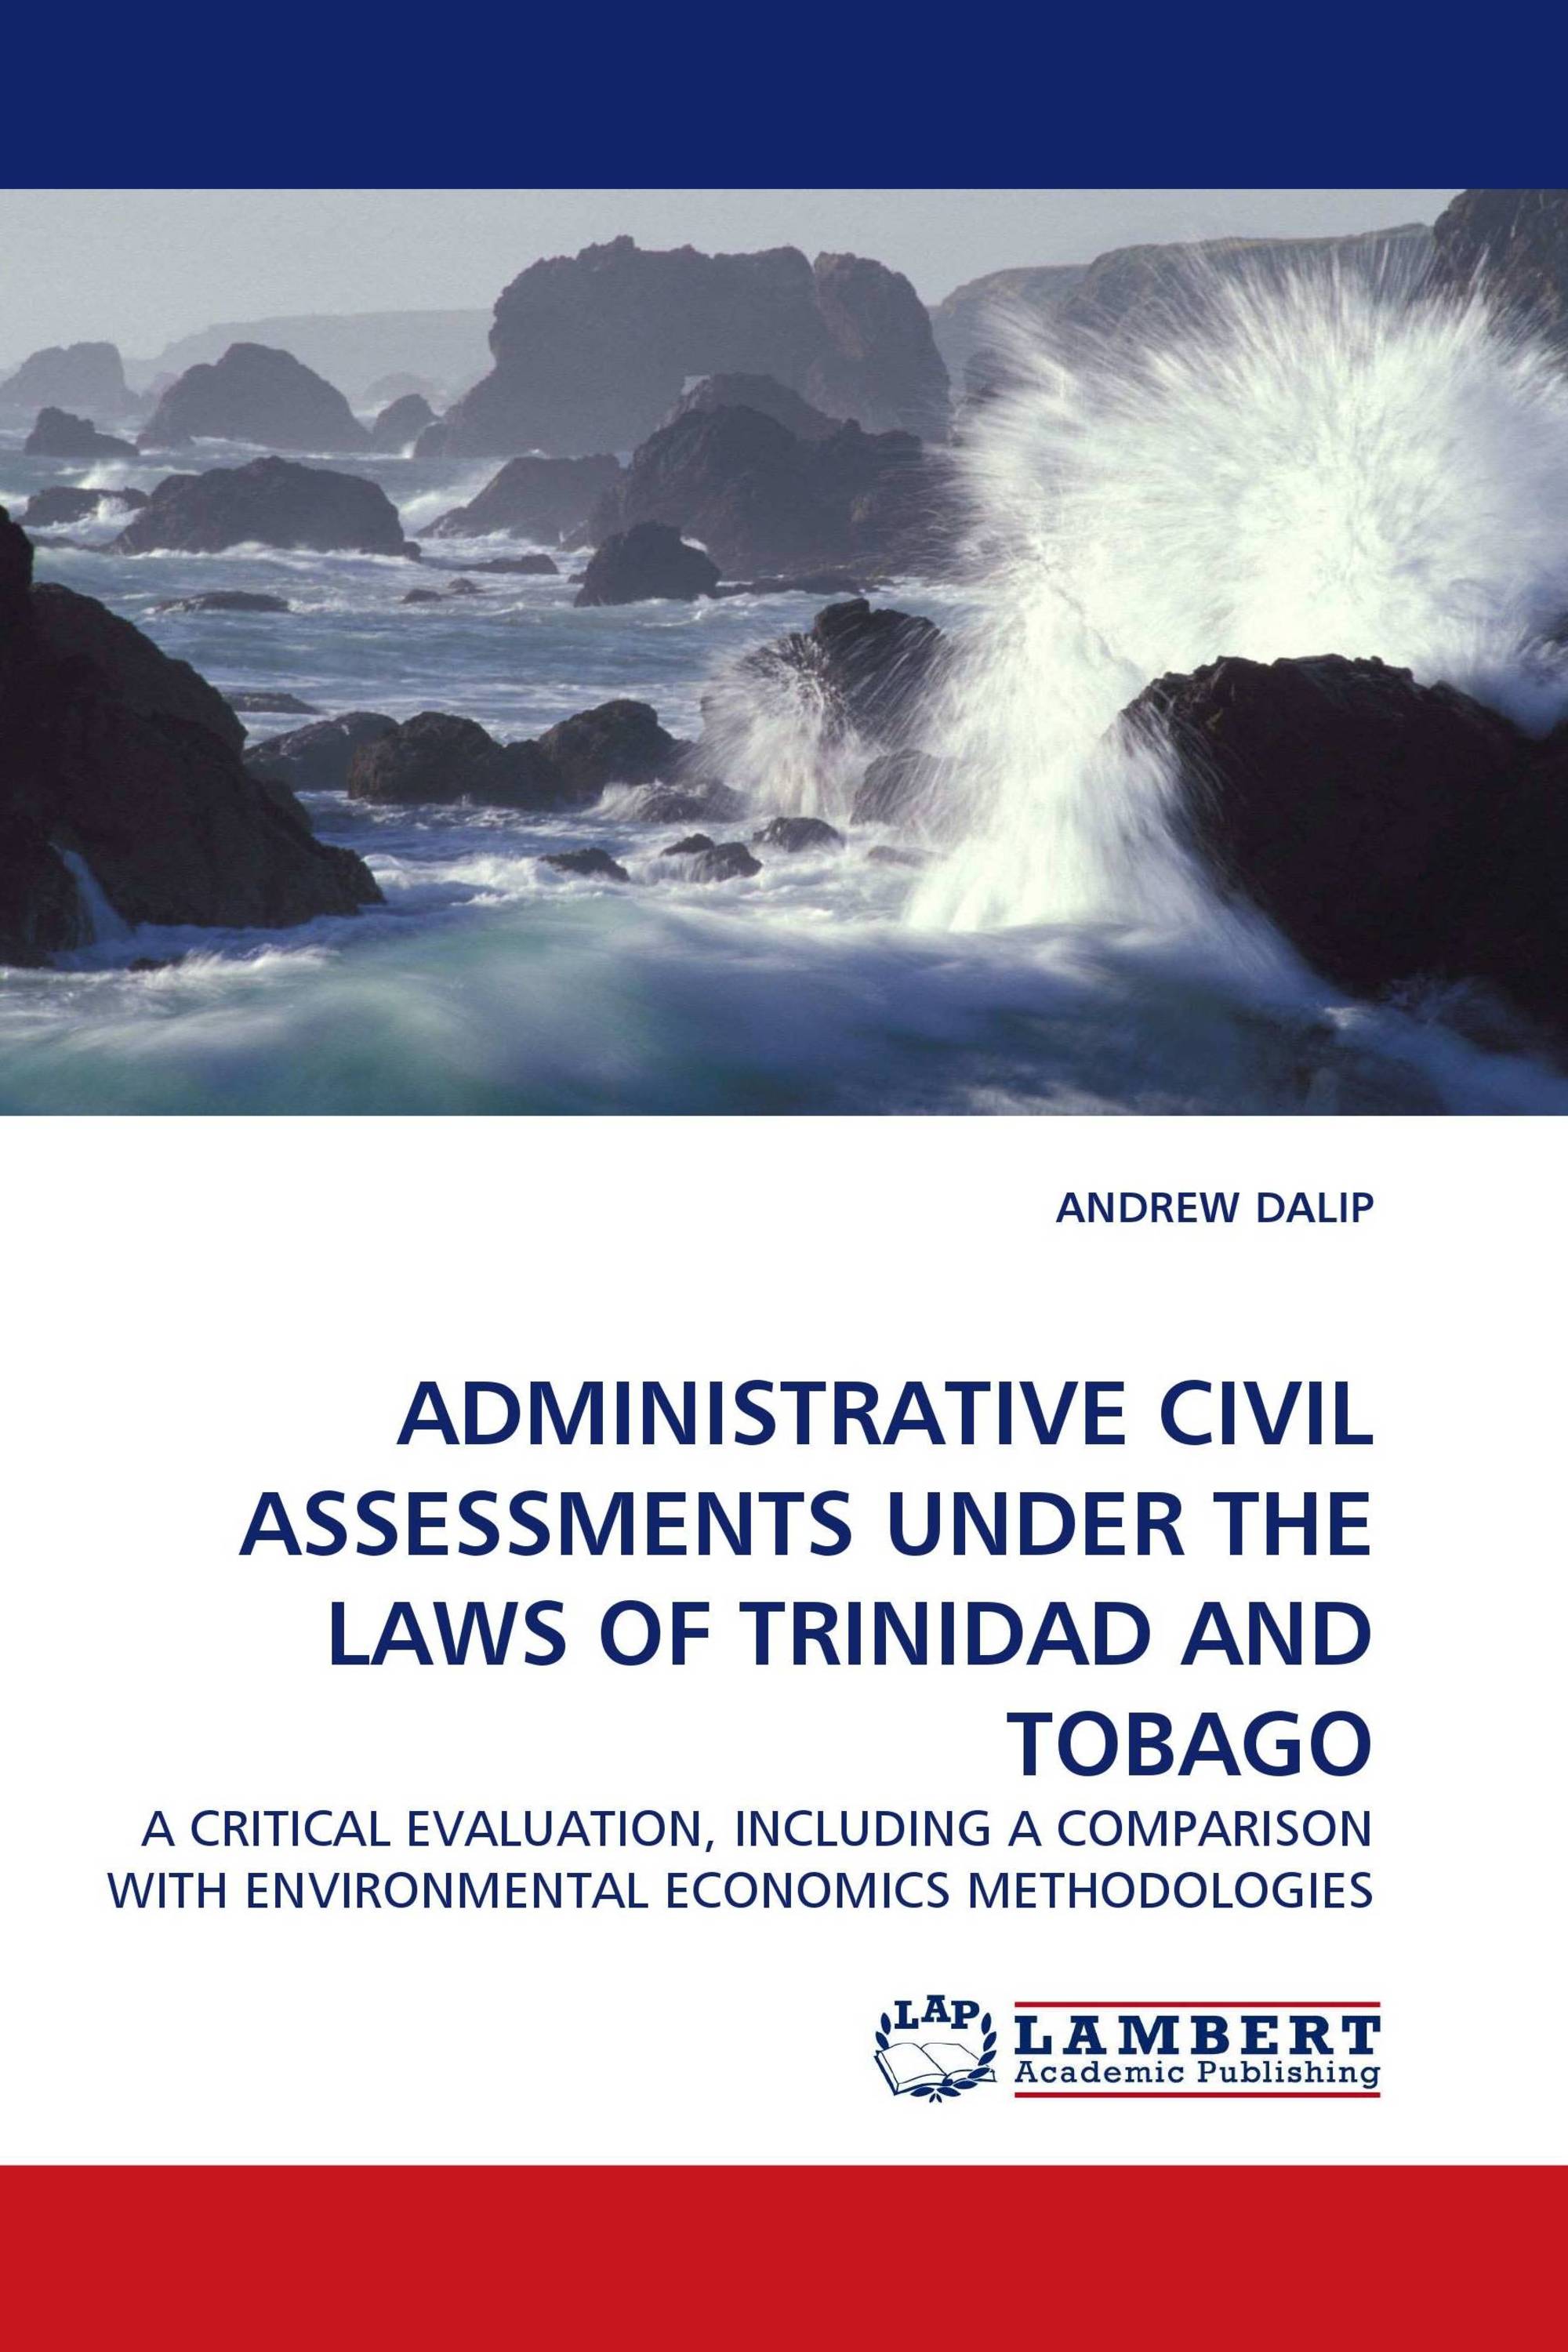 ADMINISTRATIVE CIVIL ASSESSMENTS UNDER THE LAWS OF TRINIDAD AND TOBAGO